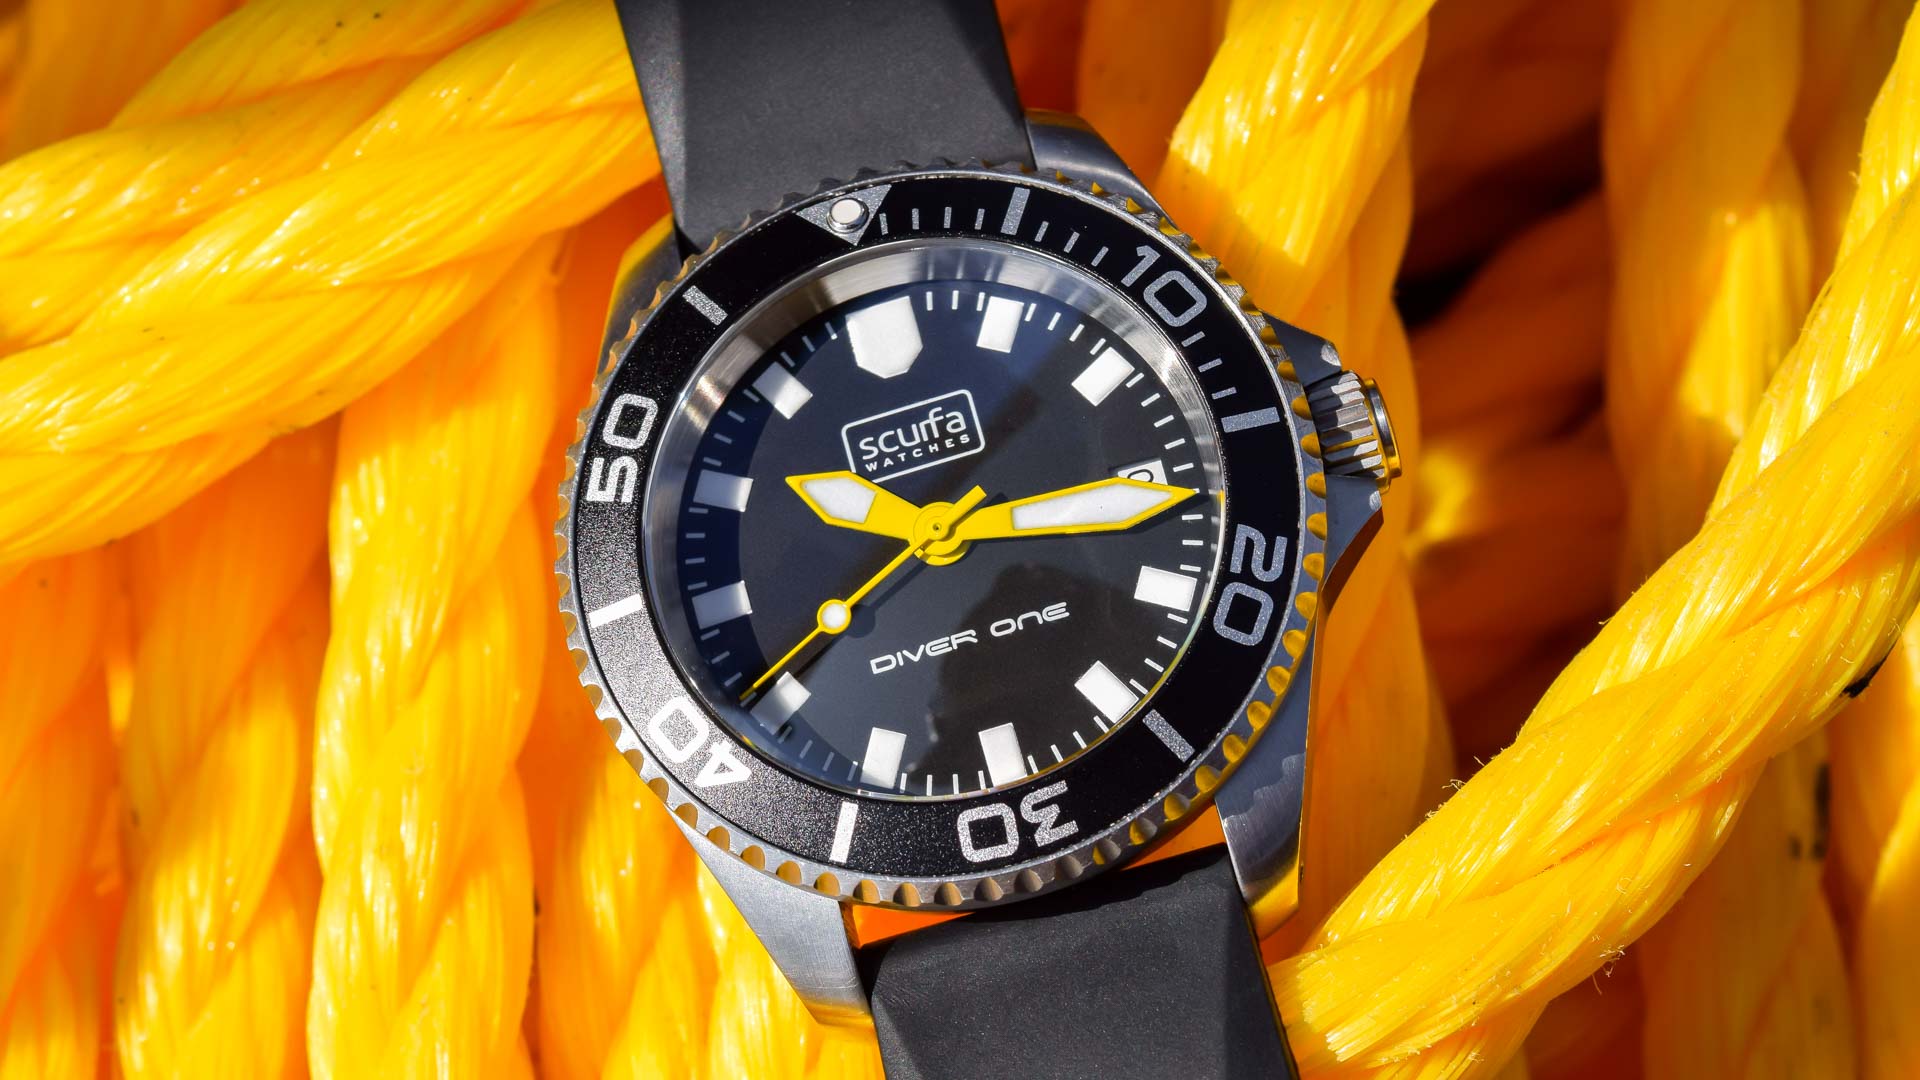 Watch Review: Commercial Diving With The Scurfa Diver One D1-500 Original